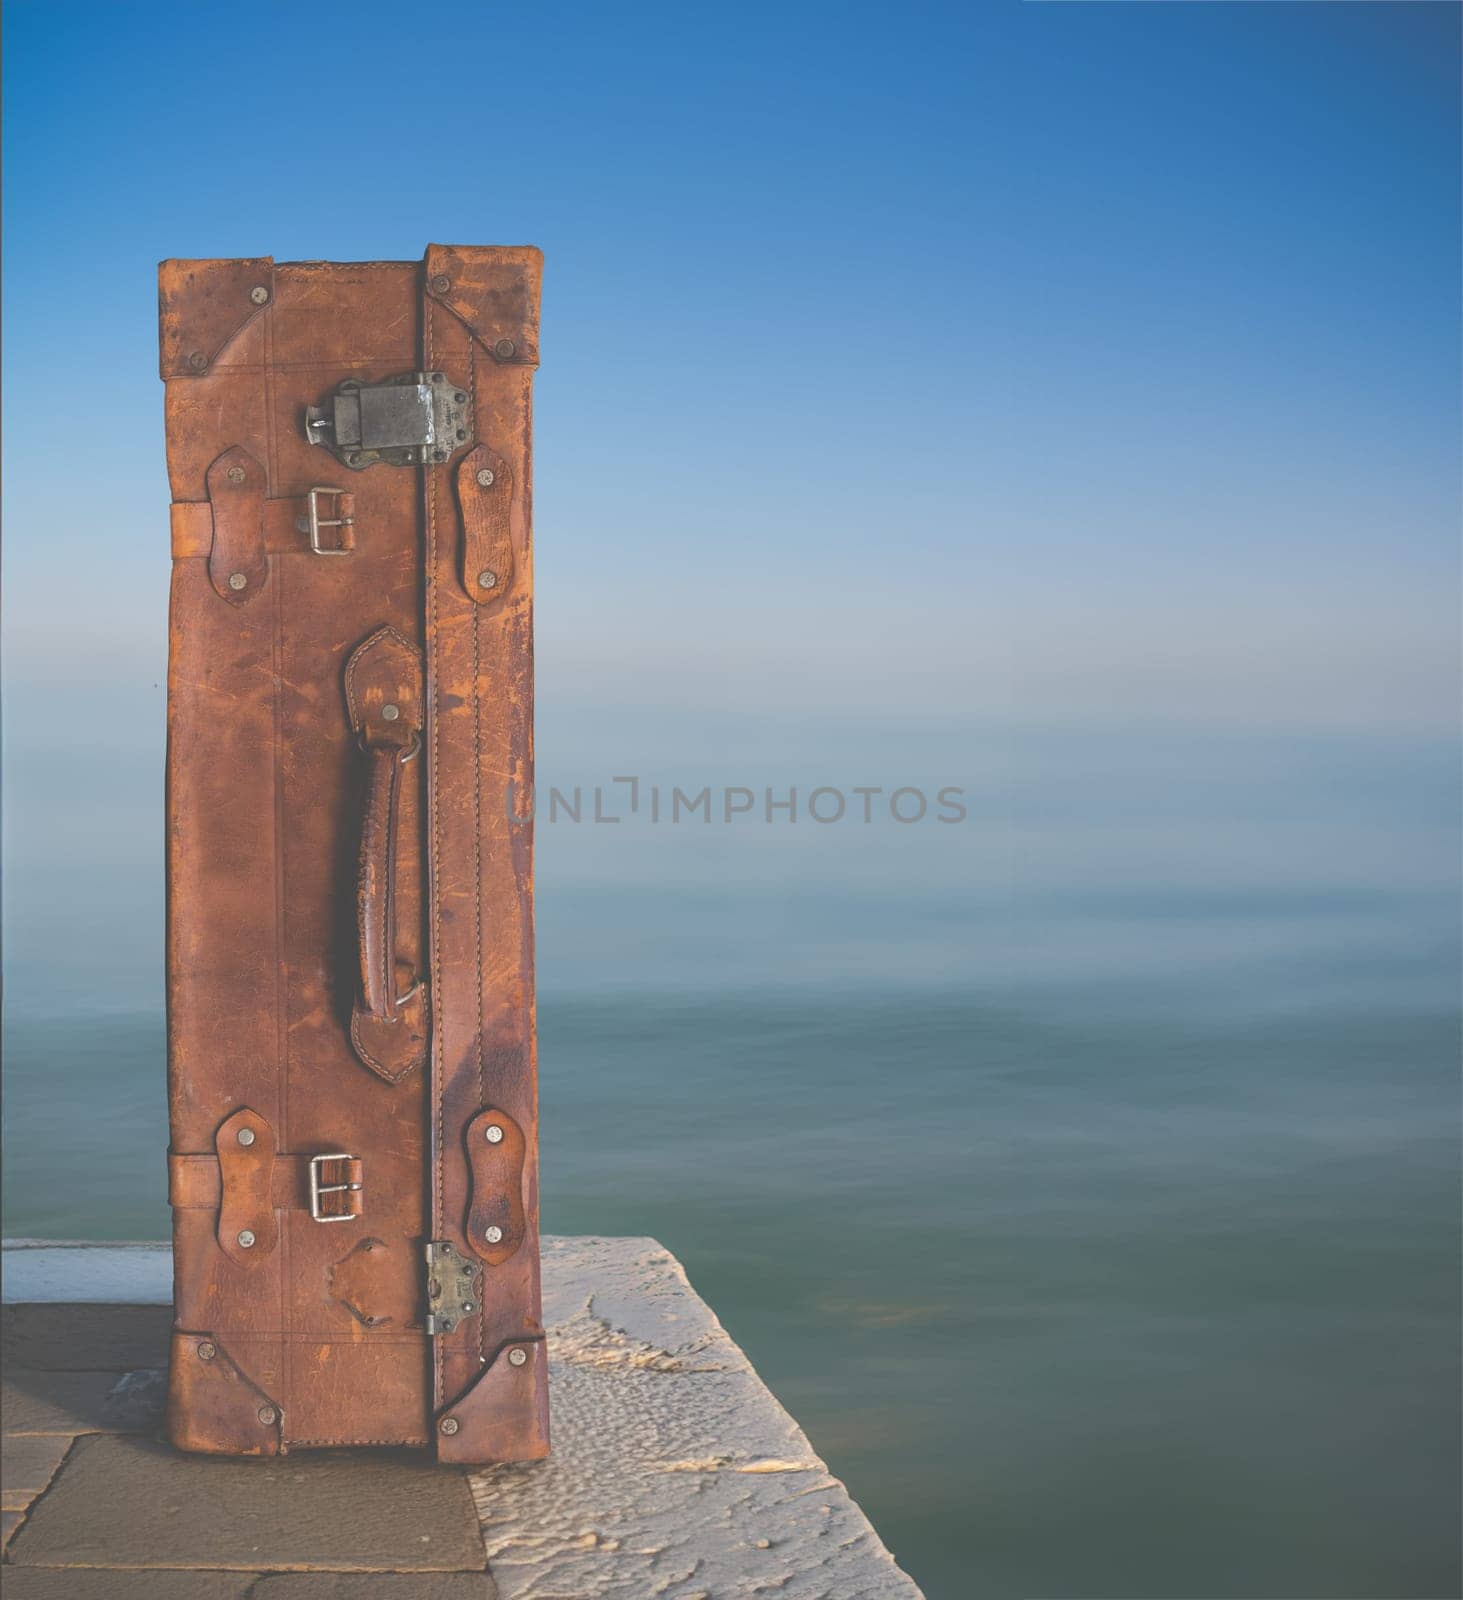 Conceptual Image Of A Vintage Suitcase By The Edge Of An Ocean, With Copy Space